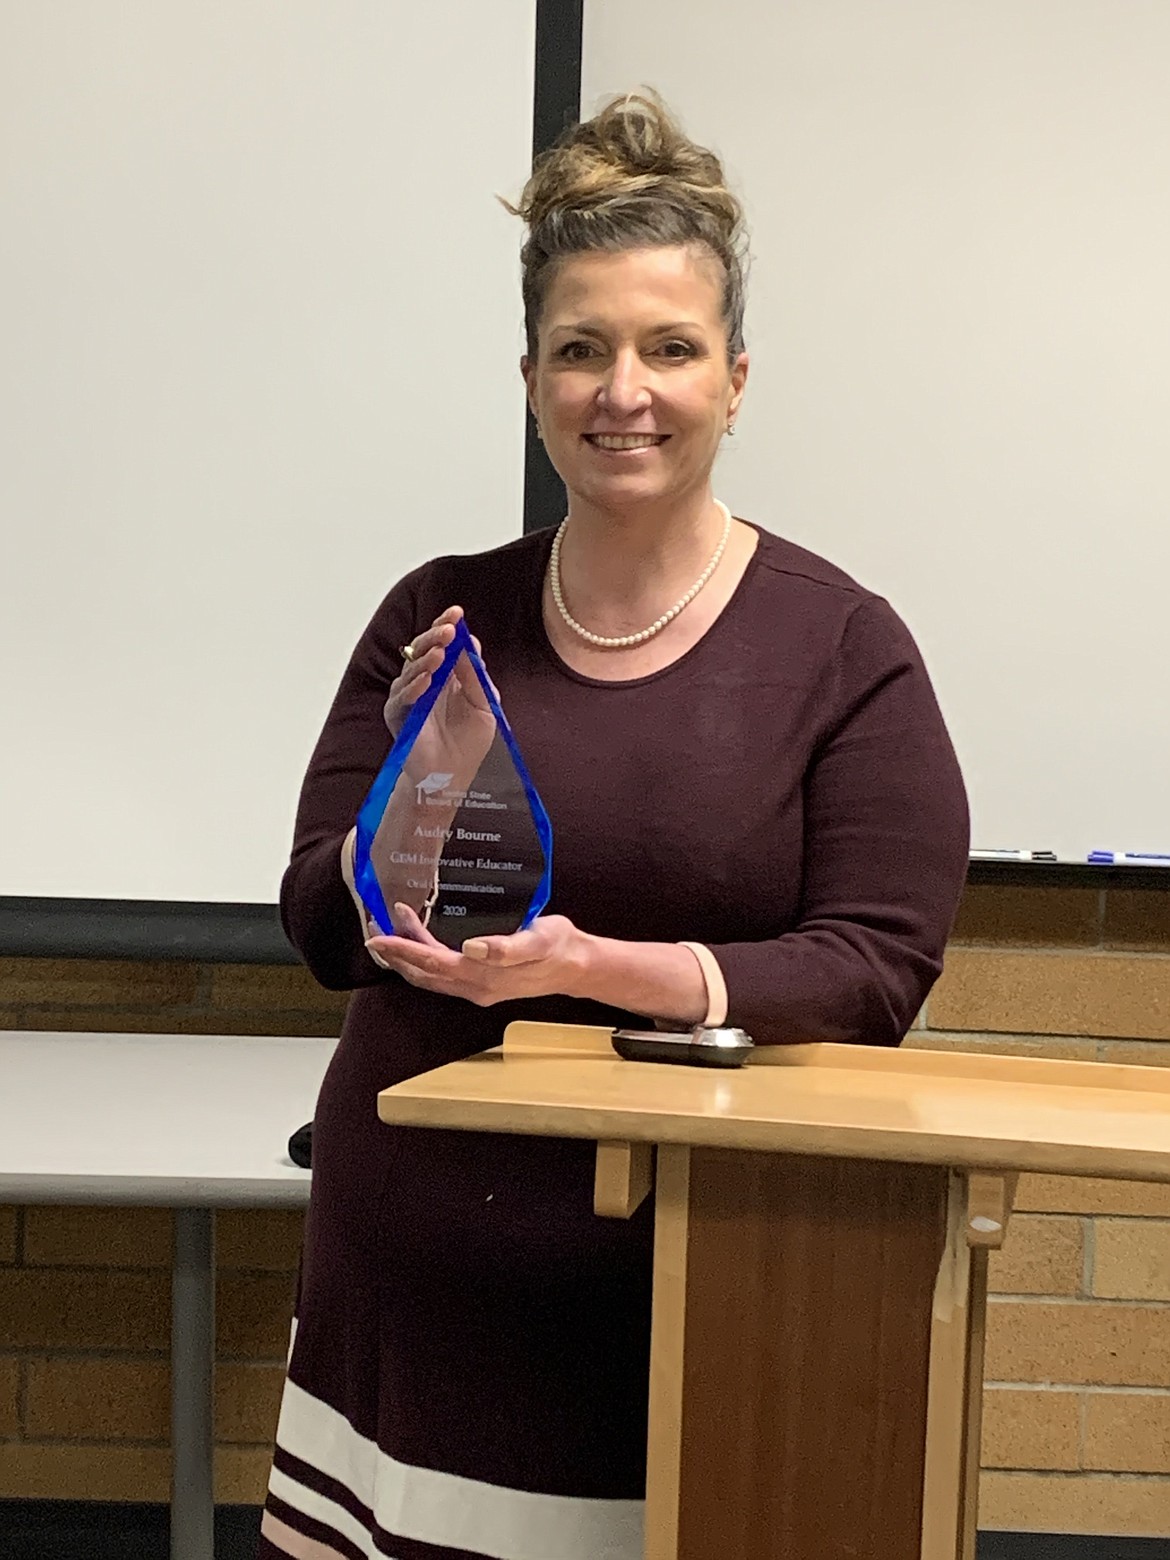 Audry Bourne, North Idaho College professor of communication and assistant division chair of NIC's communication and fine arts division, has been recognized as a GEM innovator by the Idaho State Board of Education’s General Education Committee.